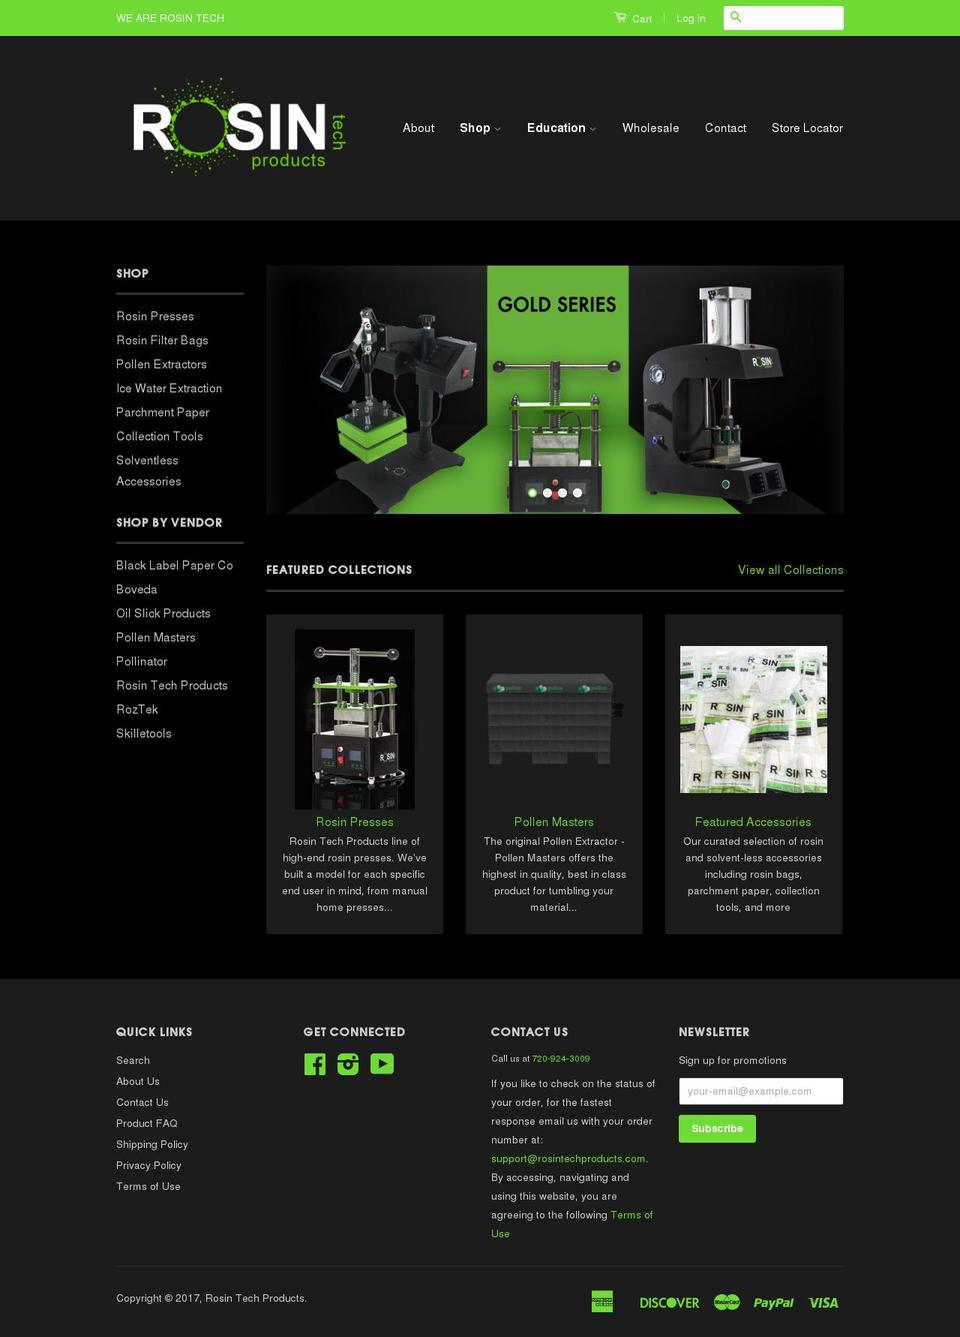 empire Shopify theme site example rosintechproducts.com